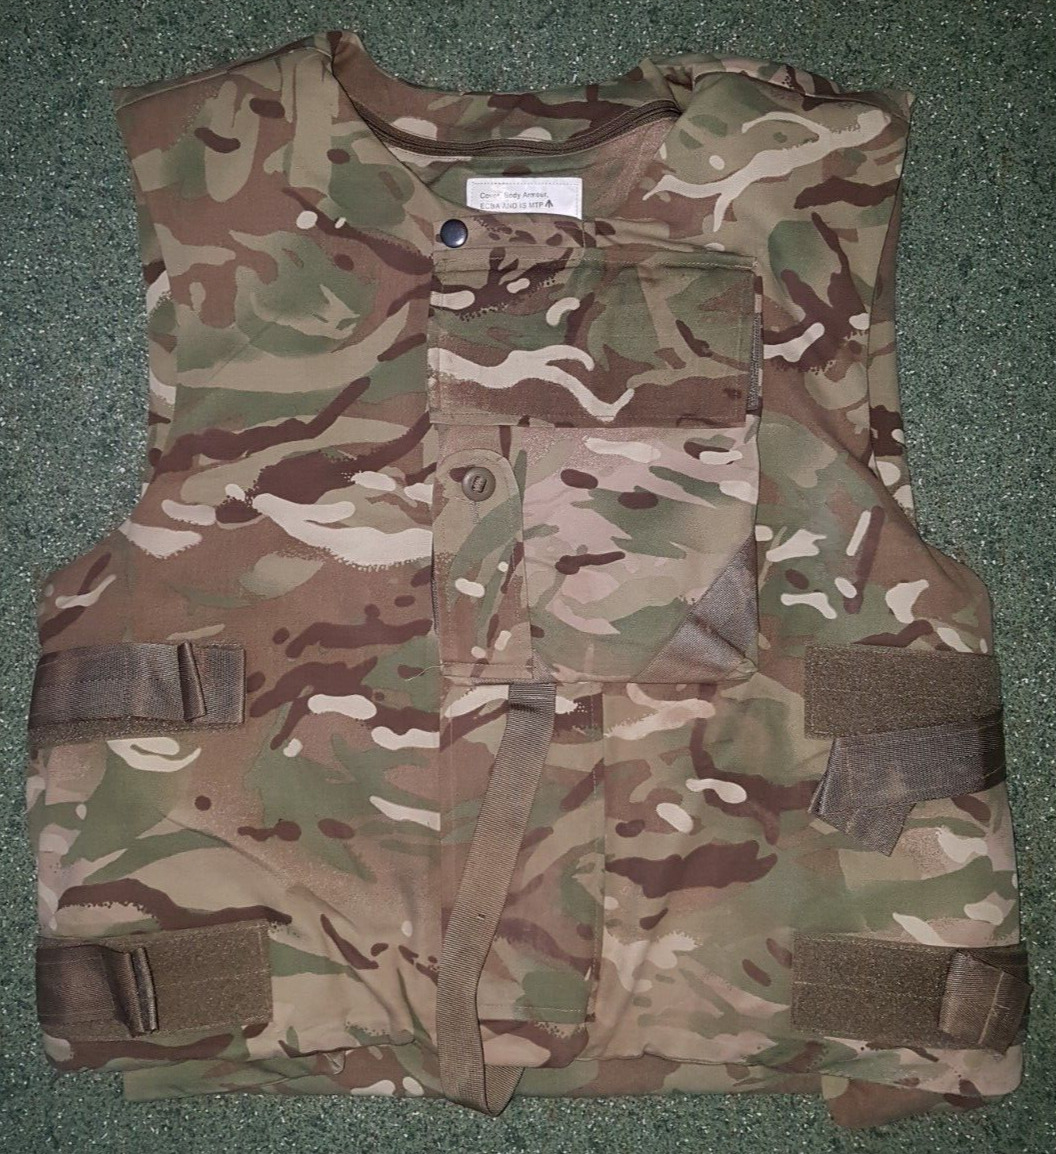 BRITISH ARMY ISSUED ECBA BODY ARMOUR, WITH SOFT ARMOUR, LARGE